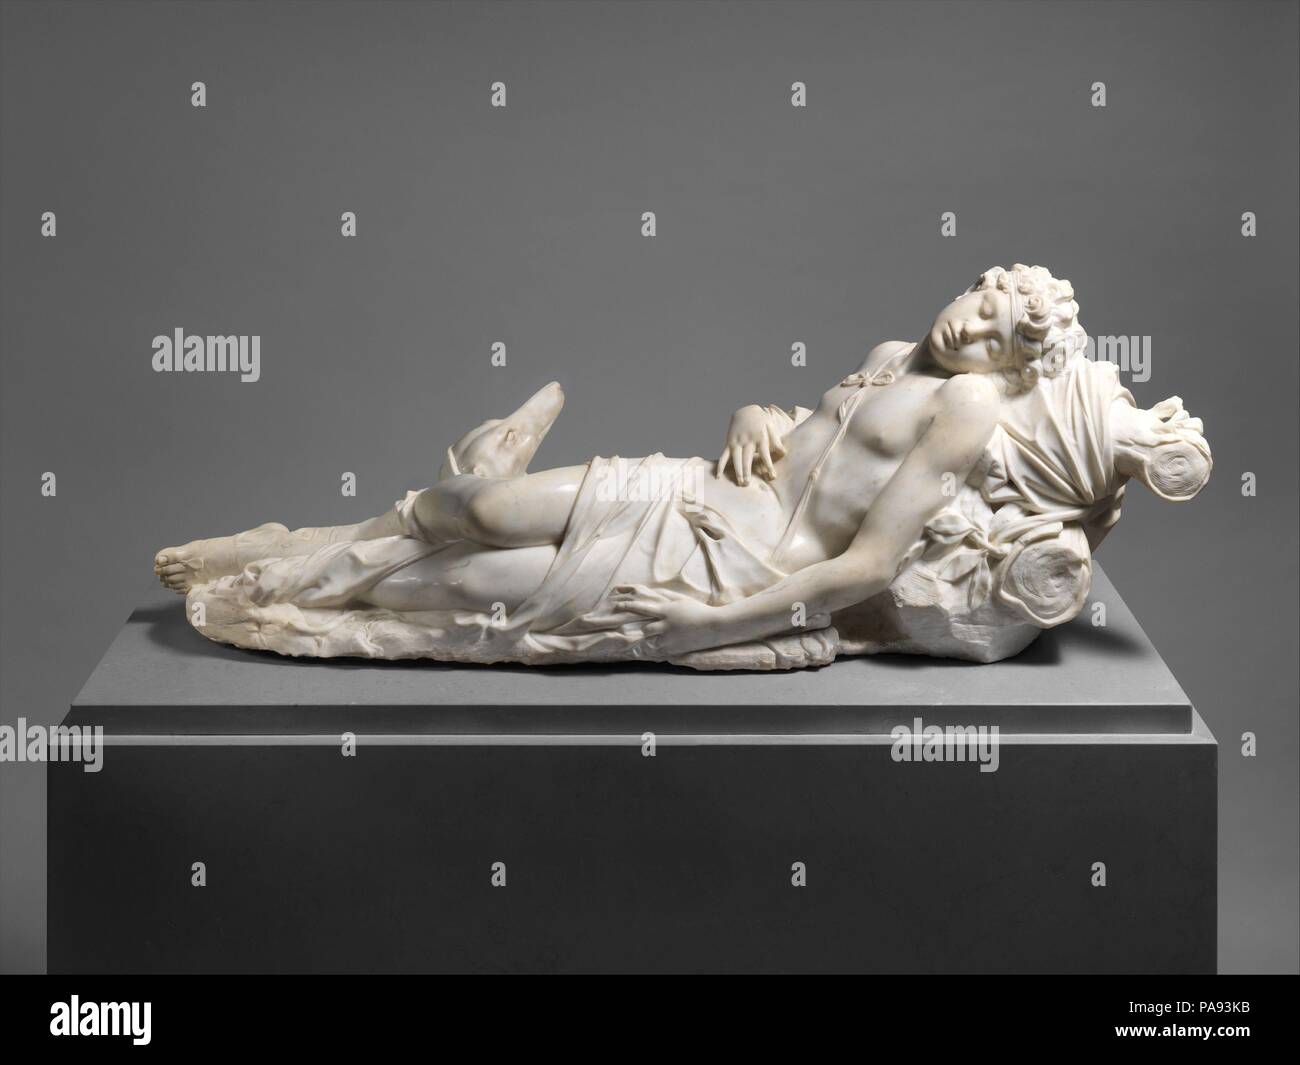 - and photography stock corradini hi-res Alamy images A